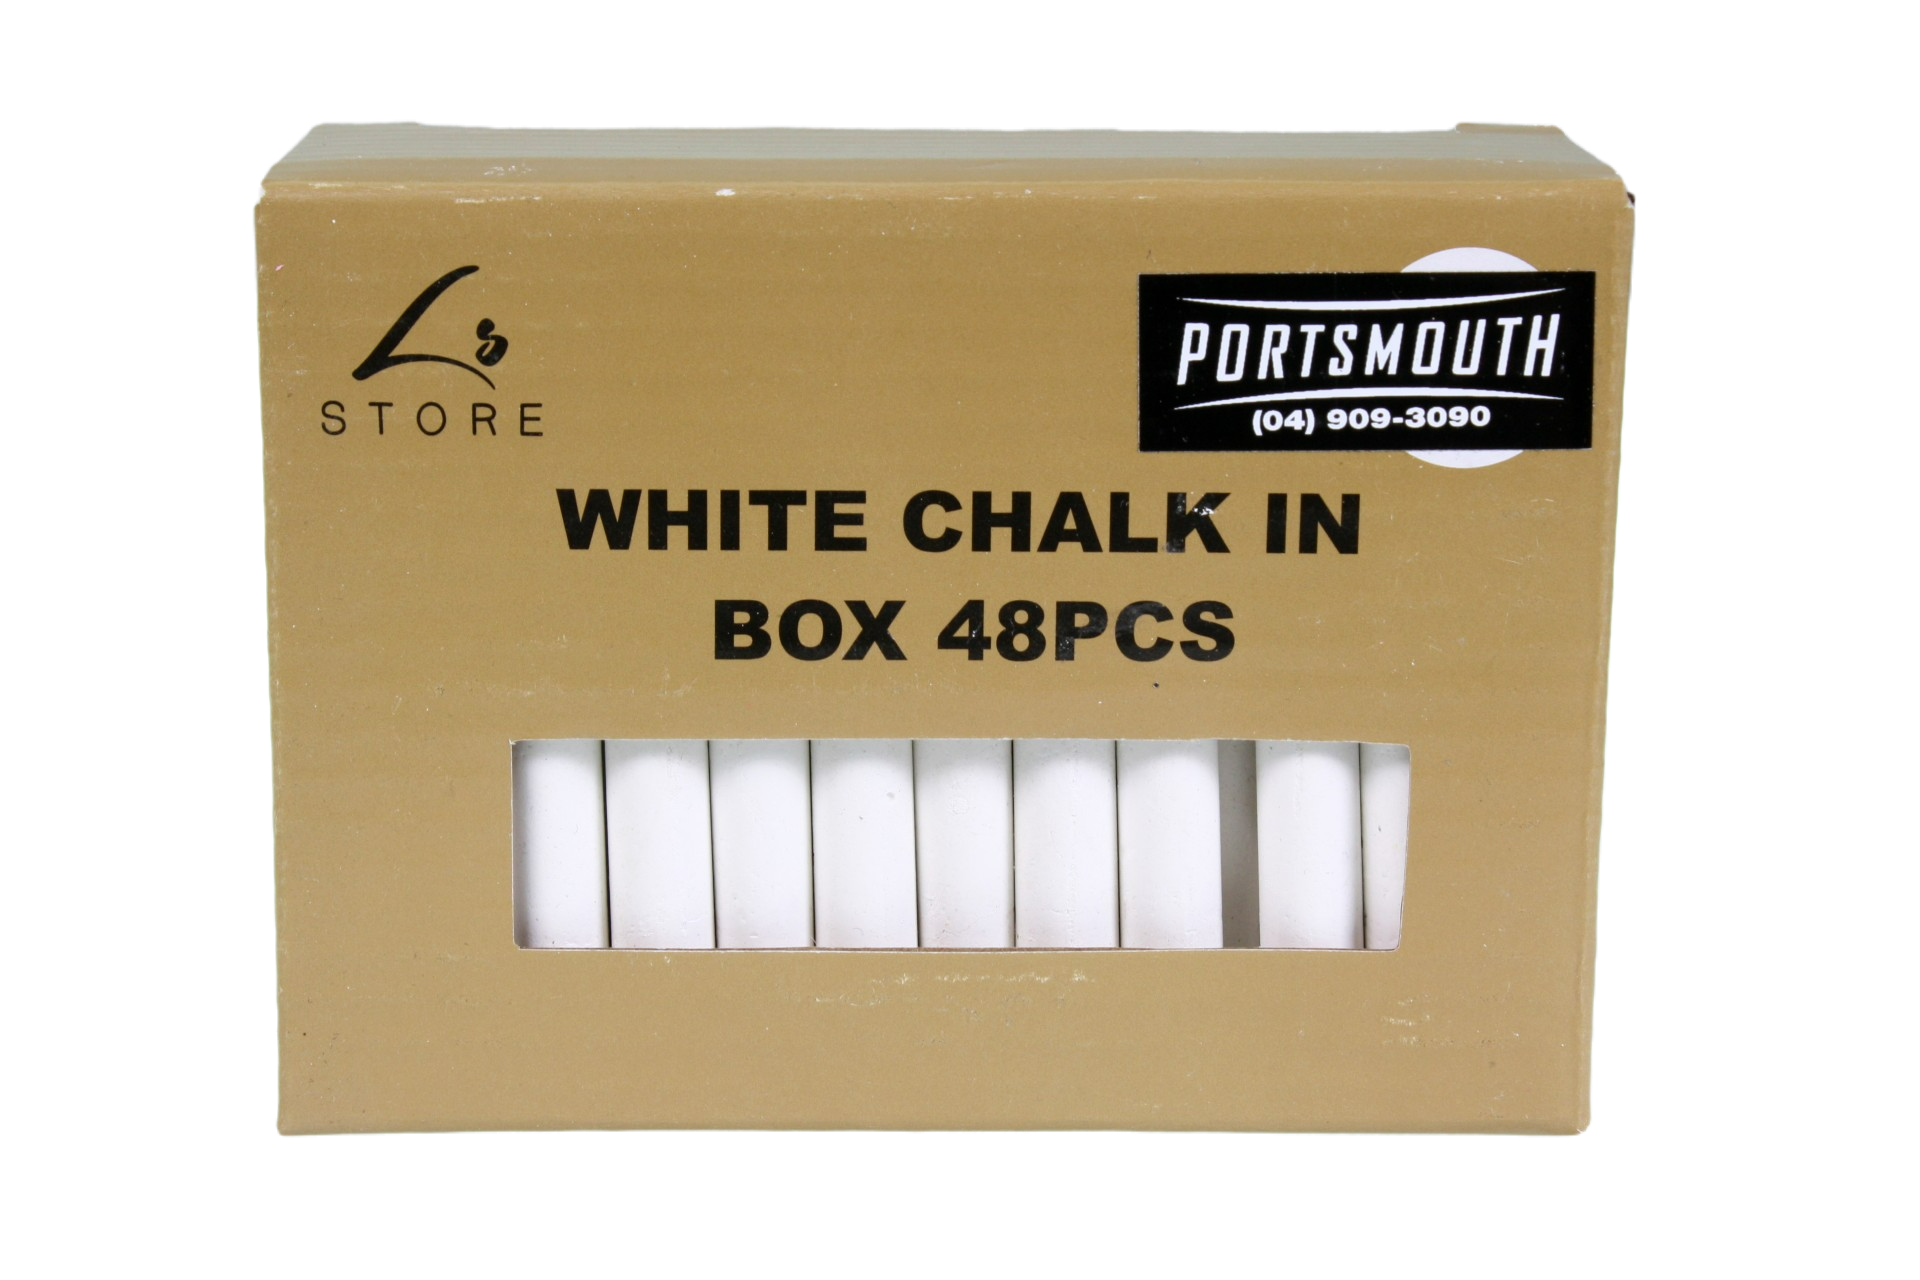 The front of the box of chalk